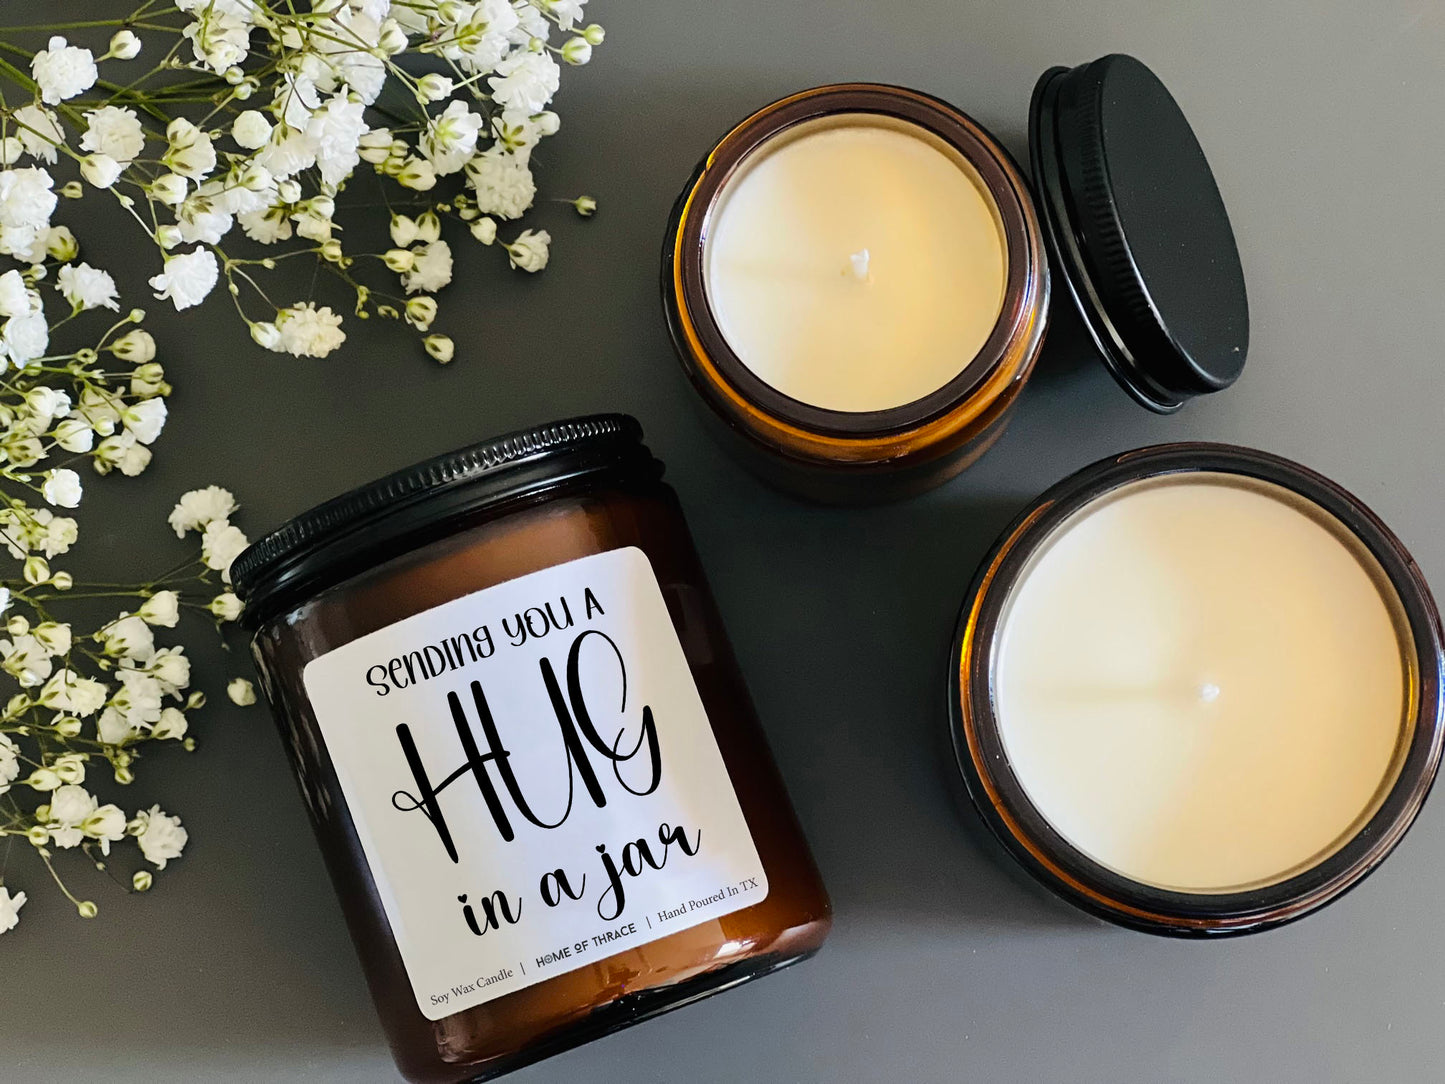 A Hug In A Jar Sympathy Gift Soy Candle For Best Friends